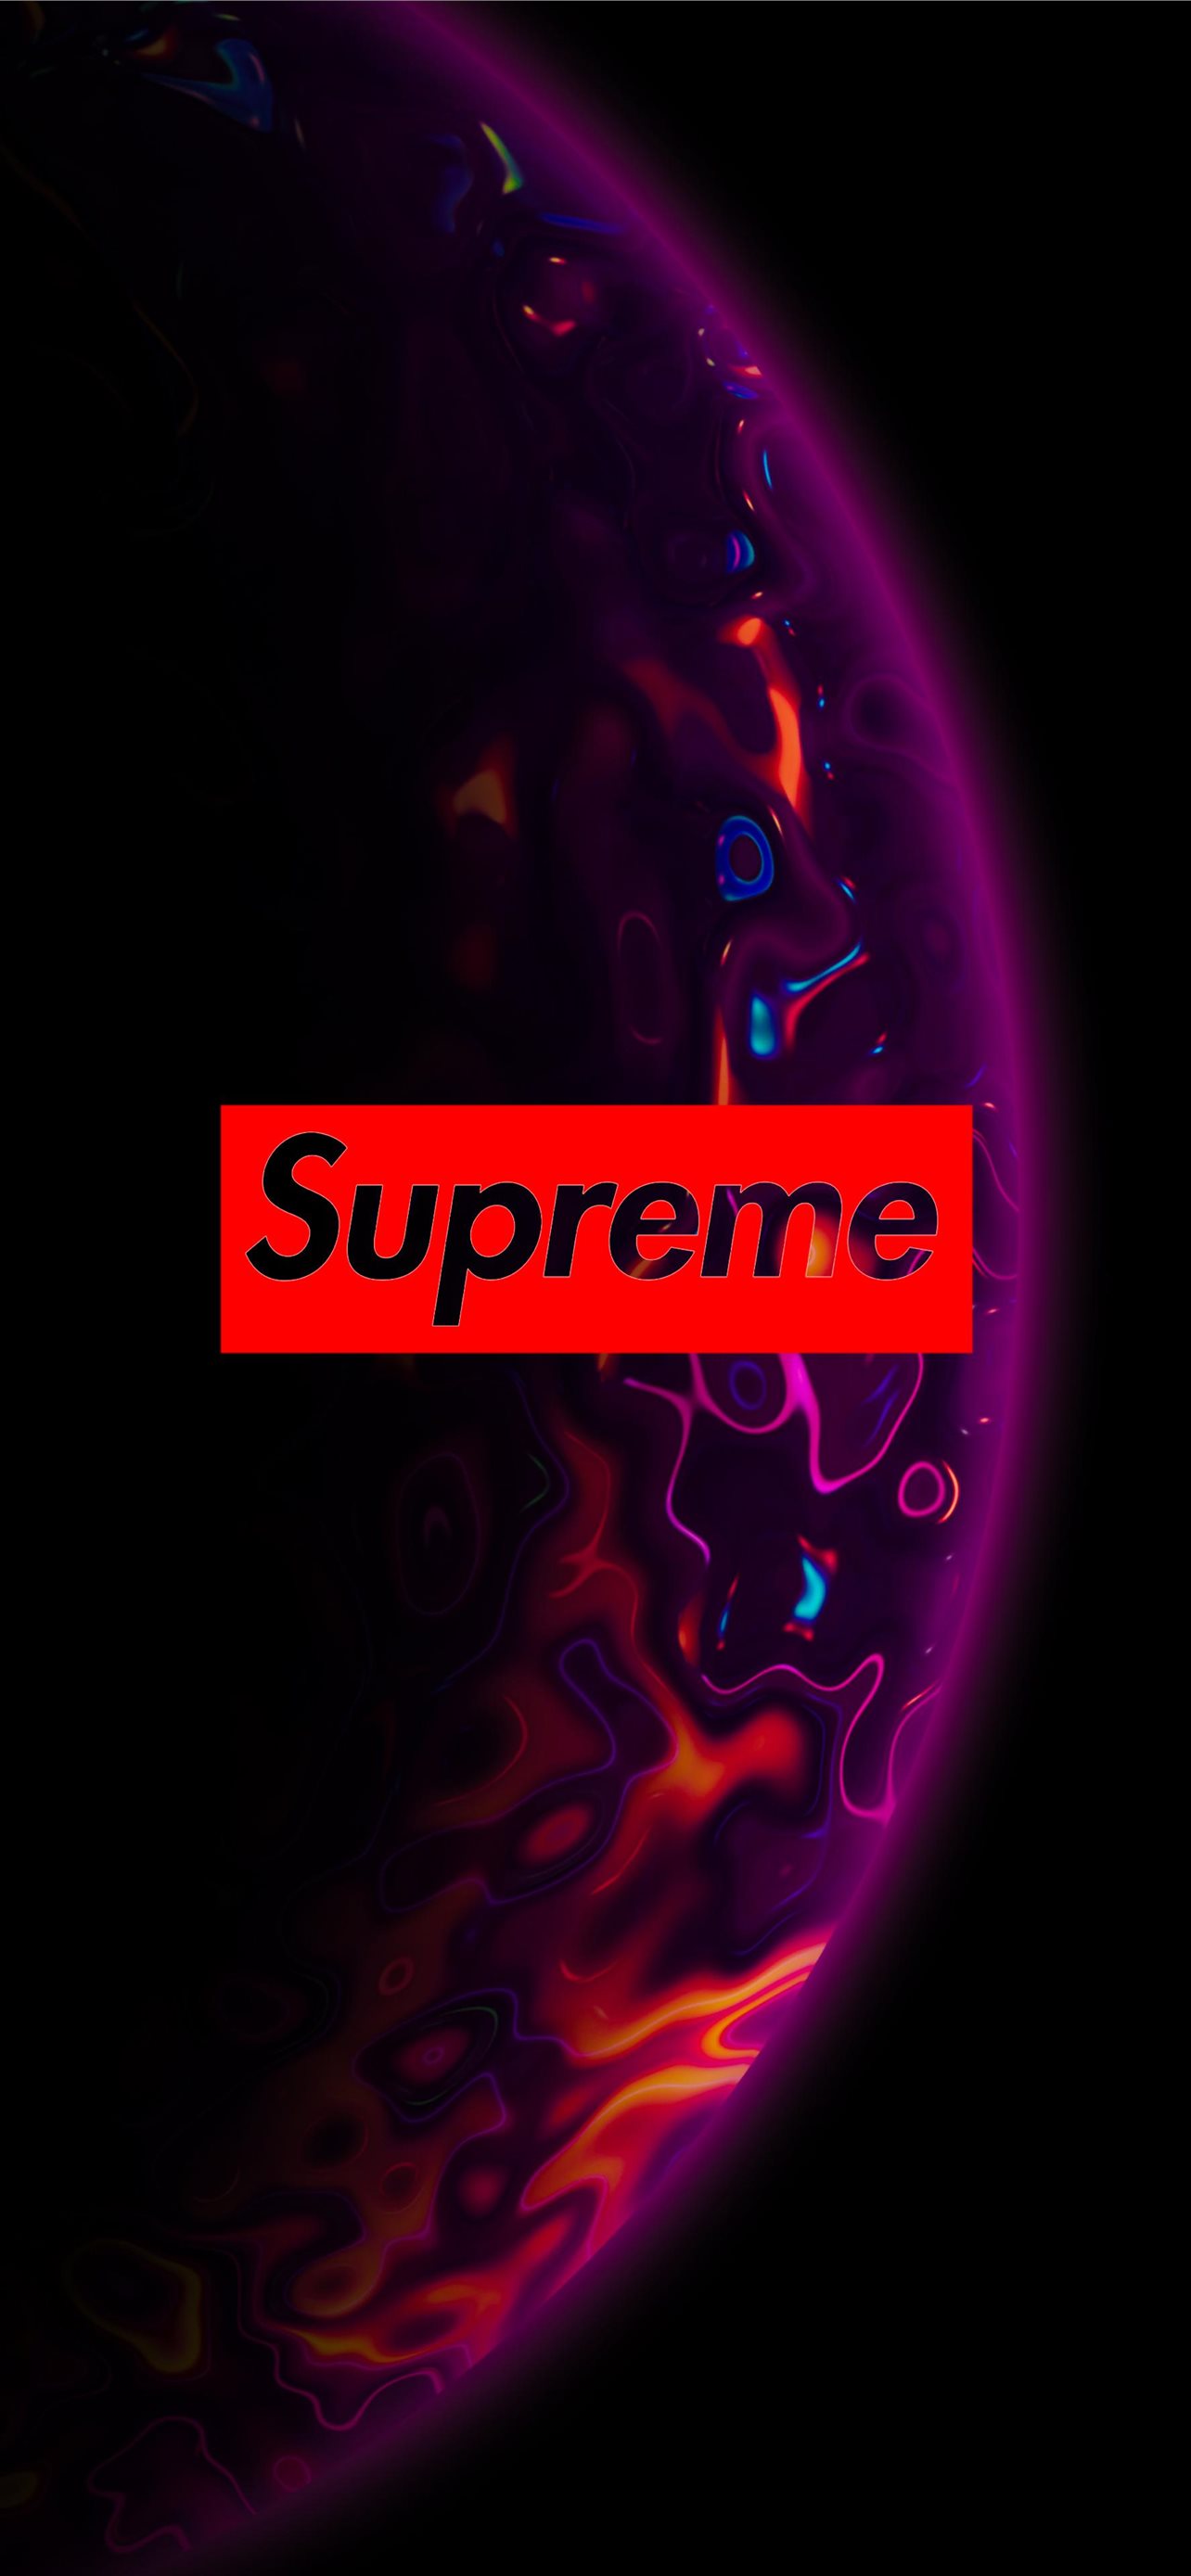 Supreme Purple Planet Iphone Wallpapers Free Download